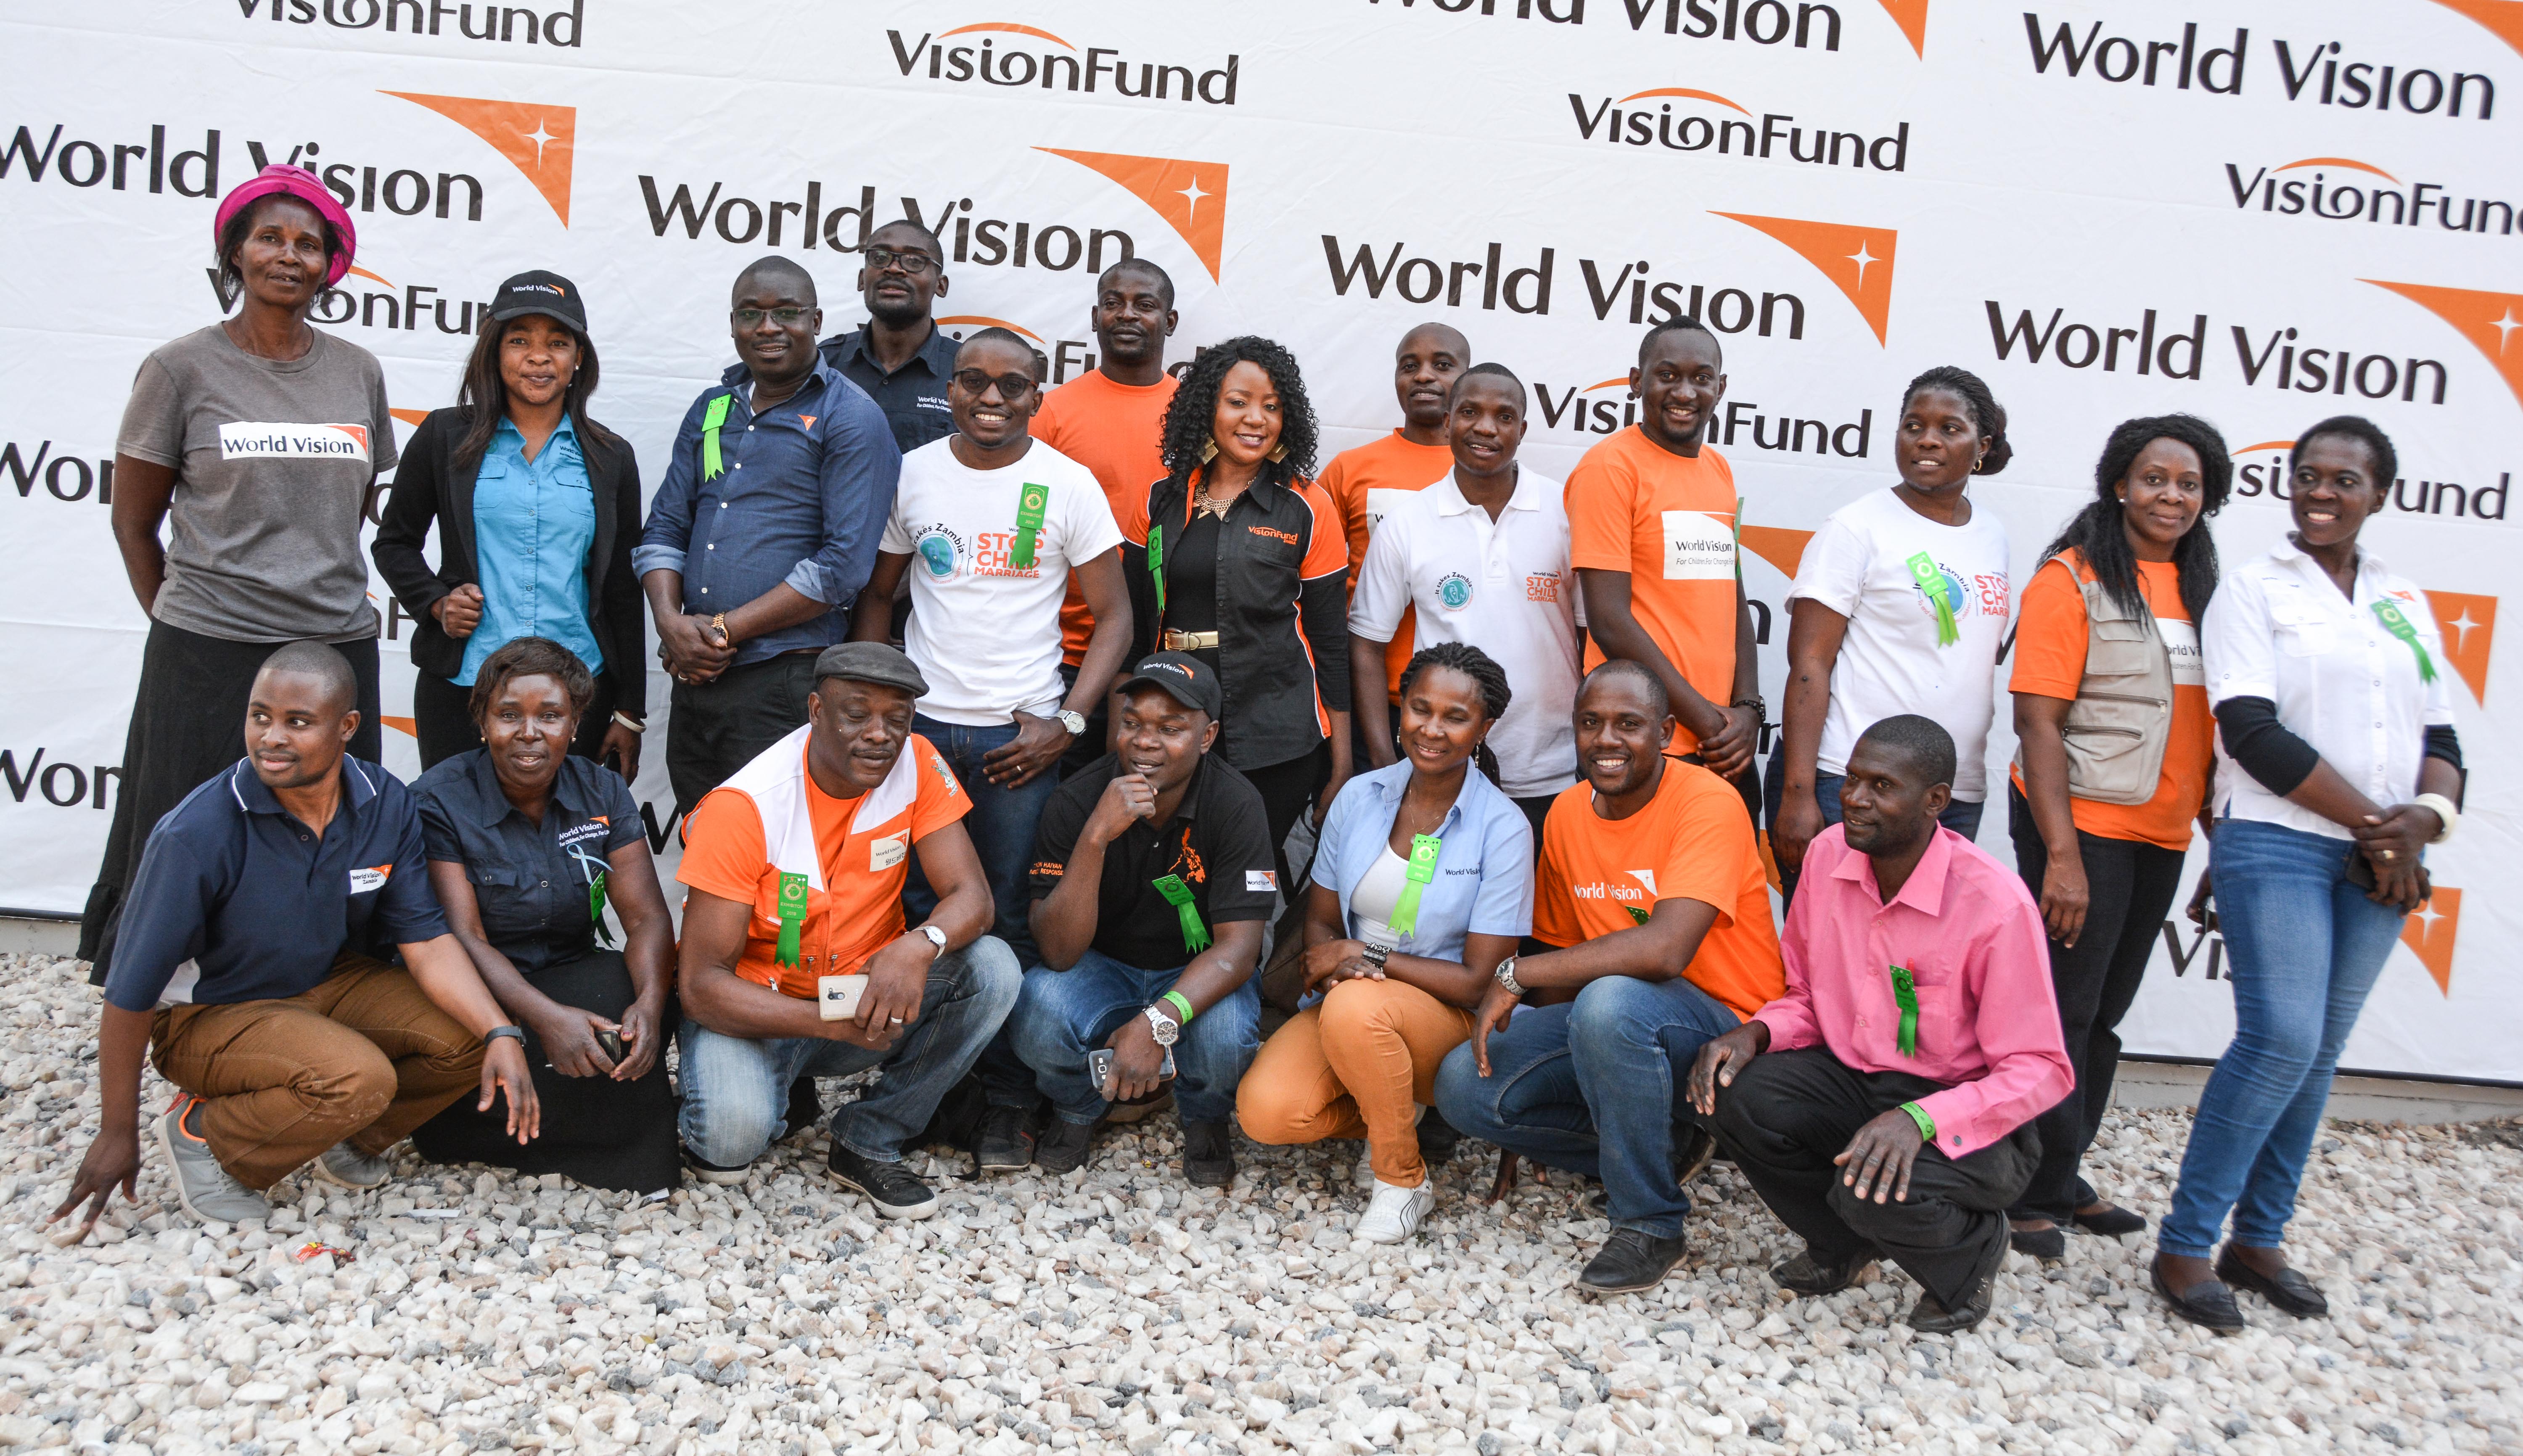 World Vision and Visionfund Staff